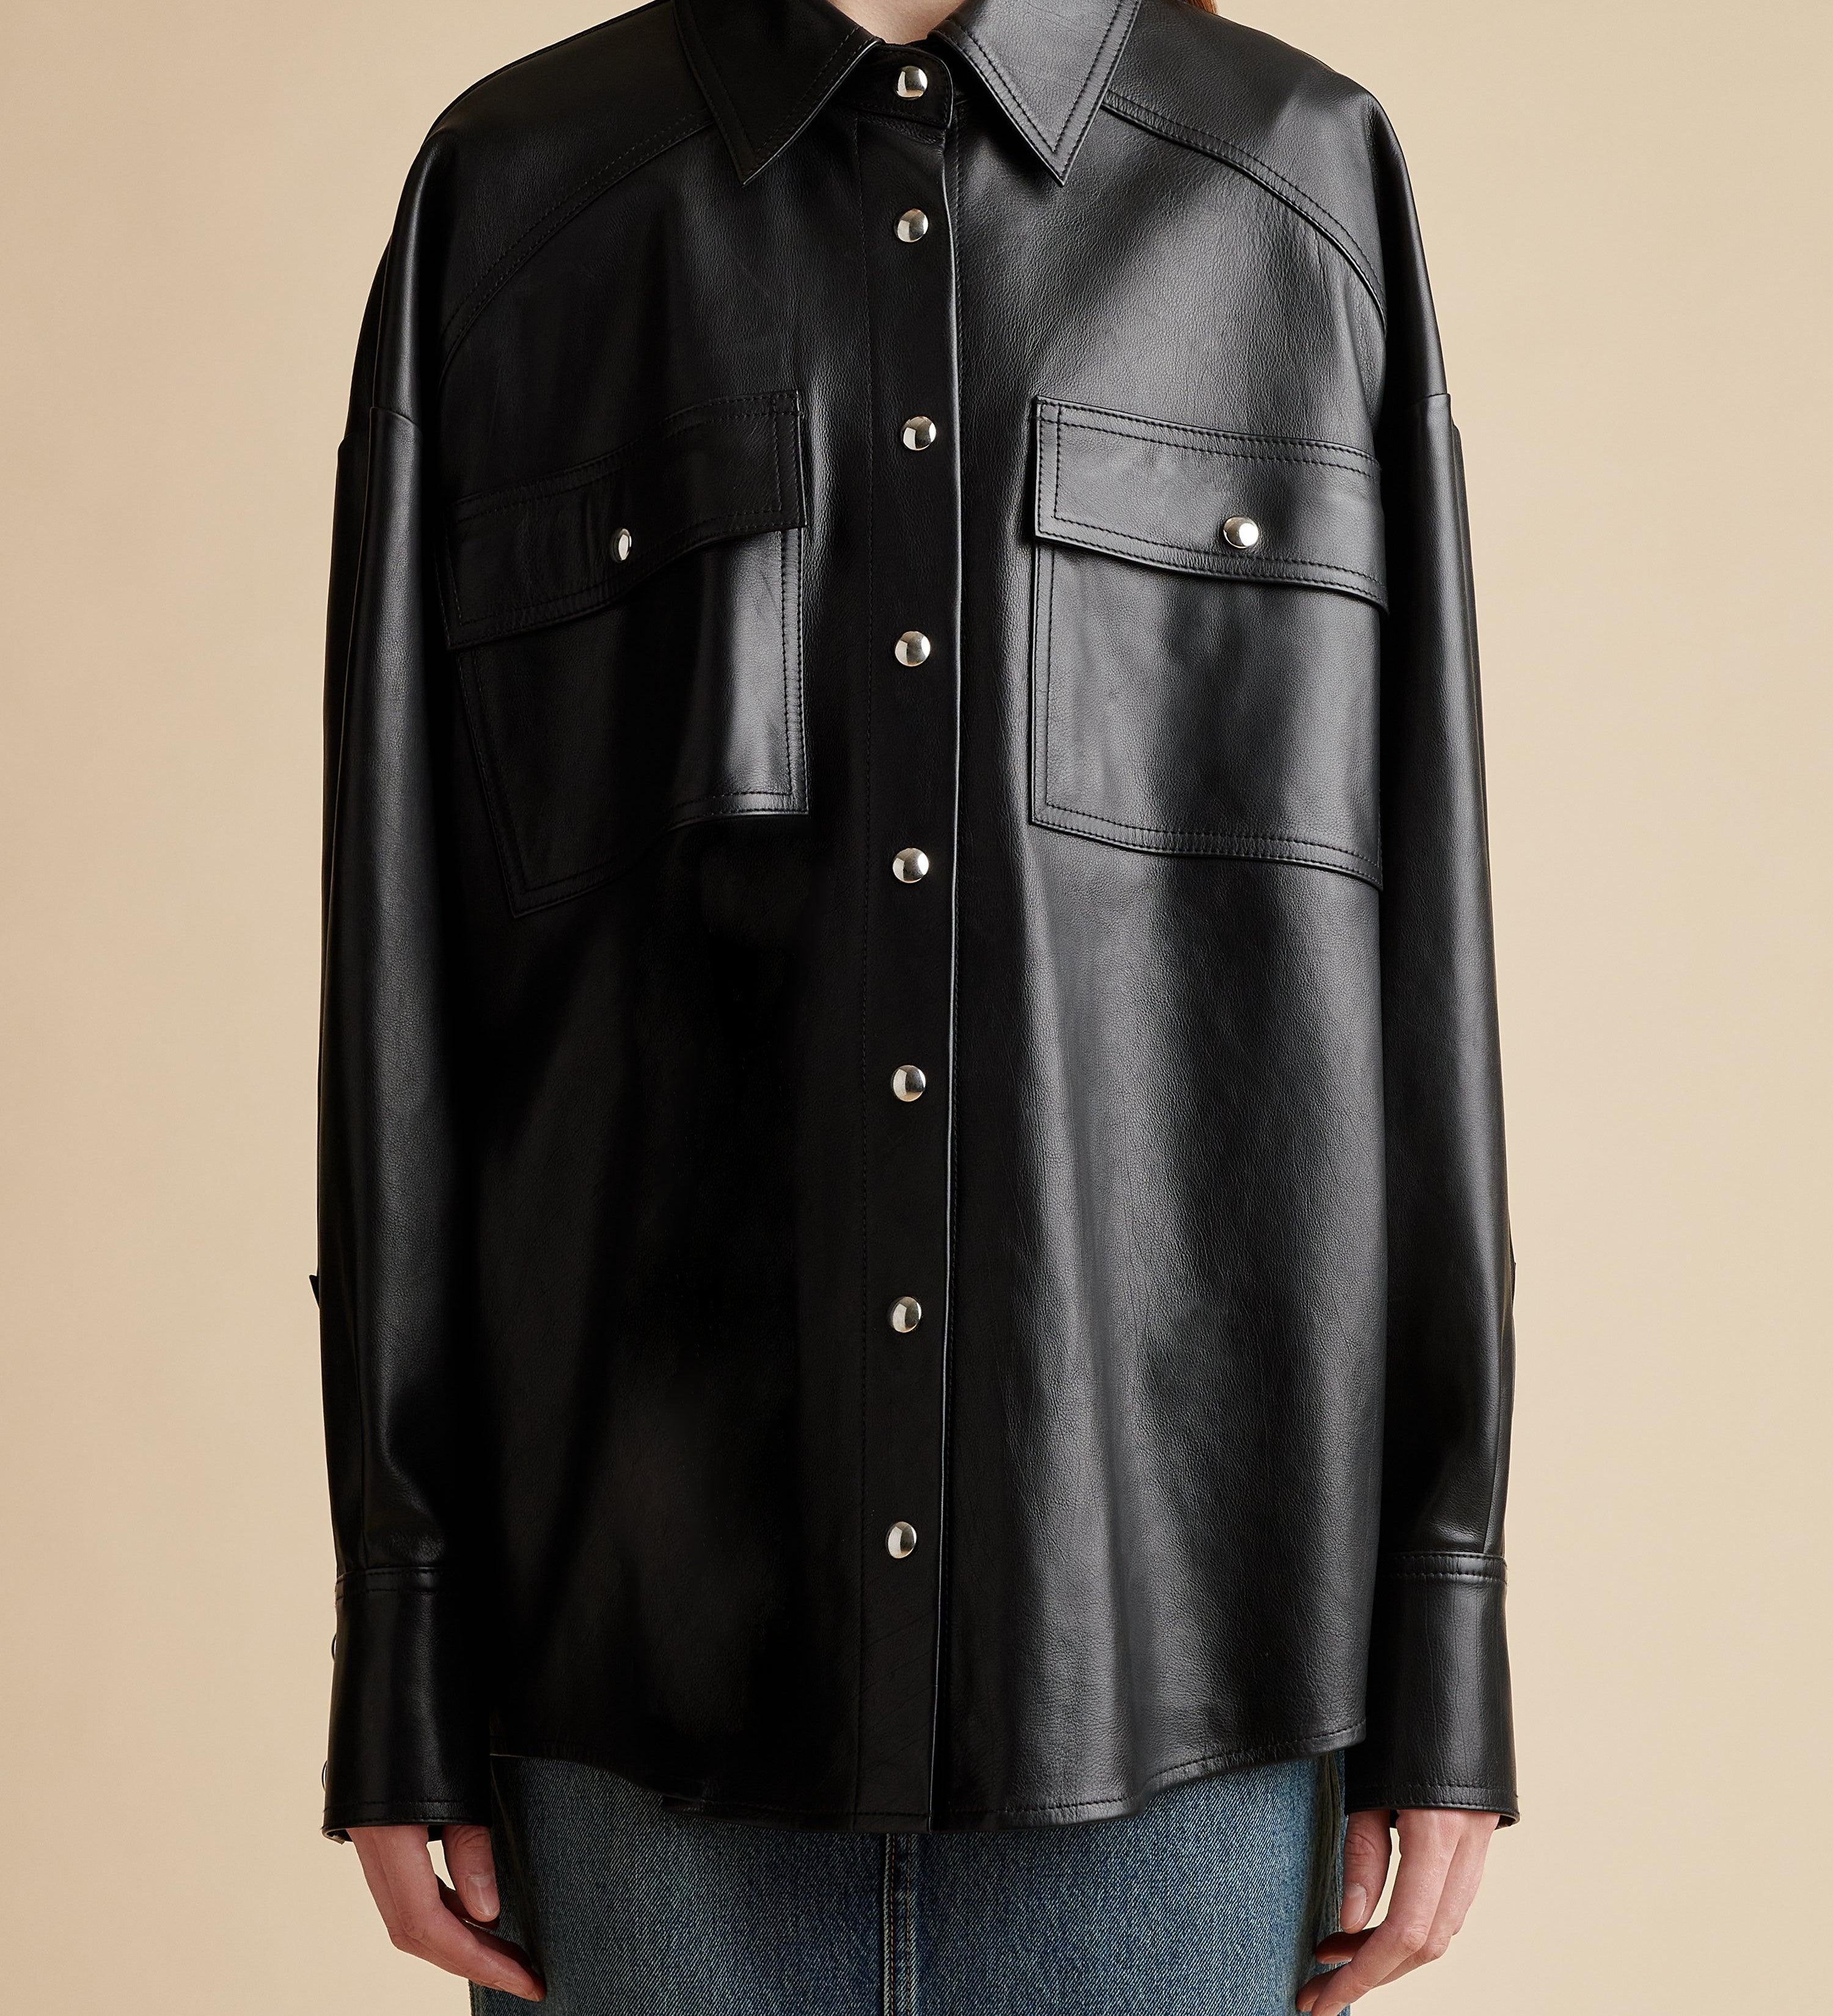 The Bea Top in Black Leather - The Iconic Issue